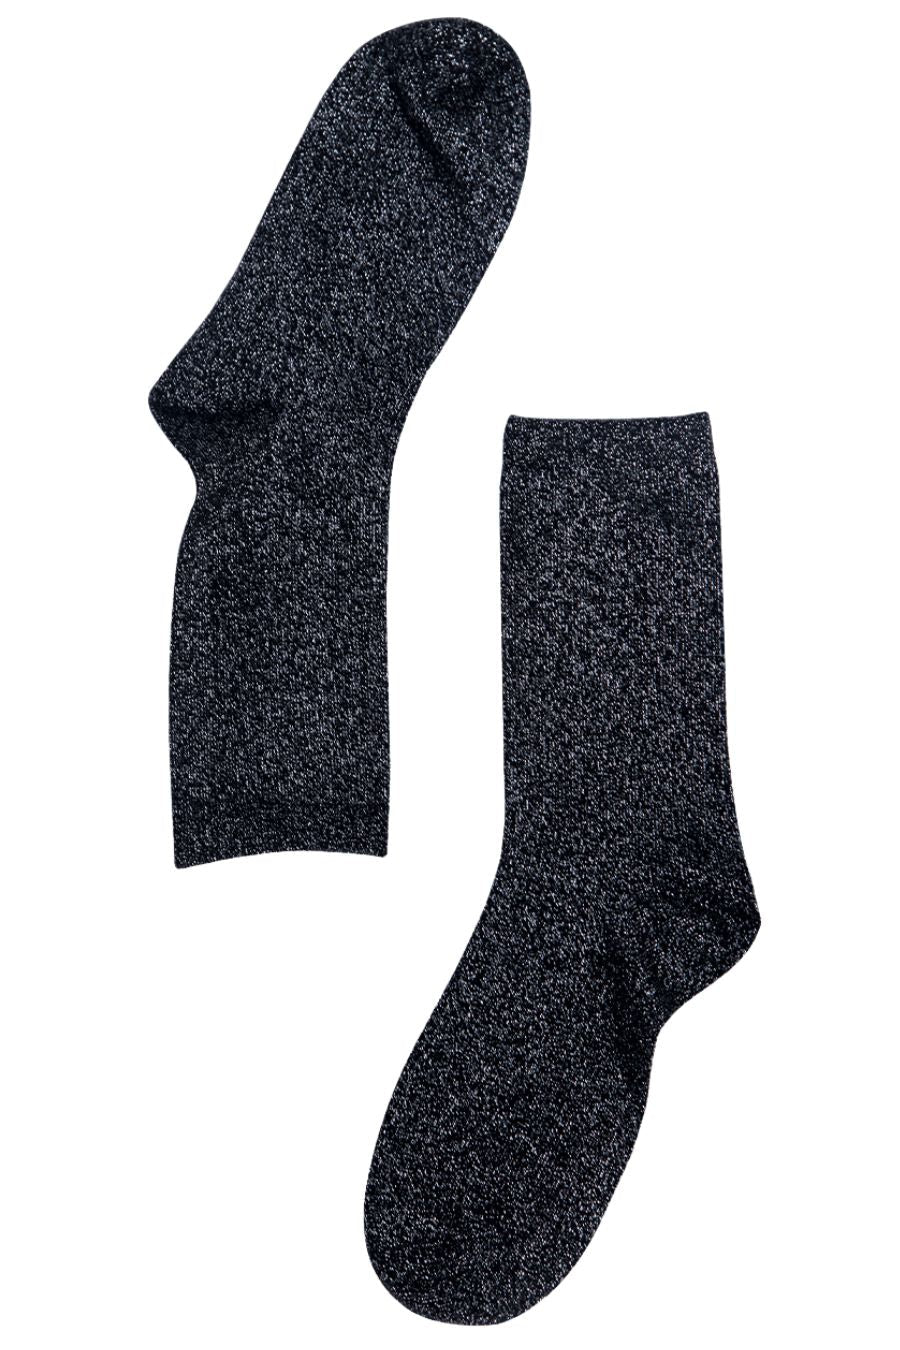 black and silver glitter ankle socks